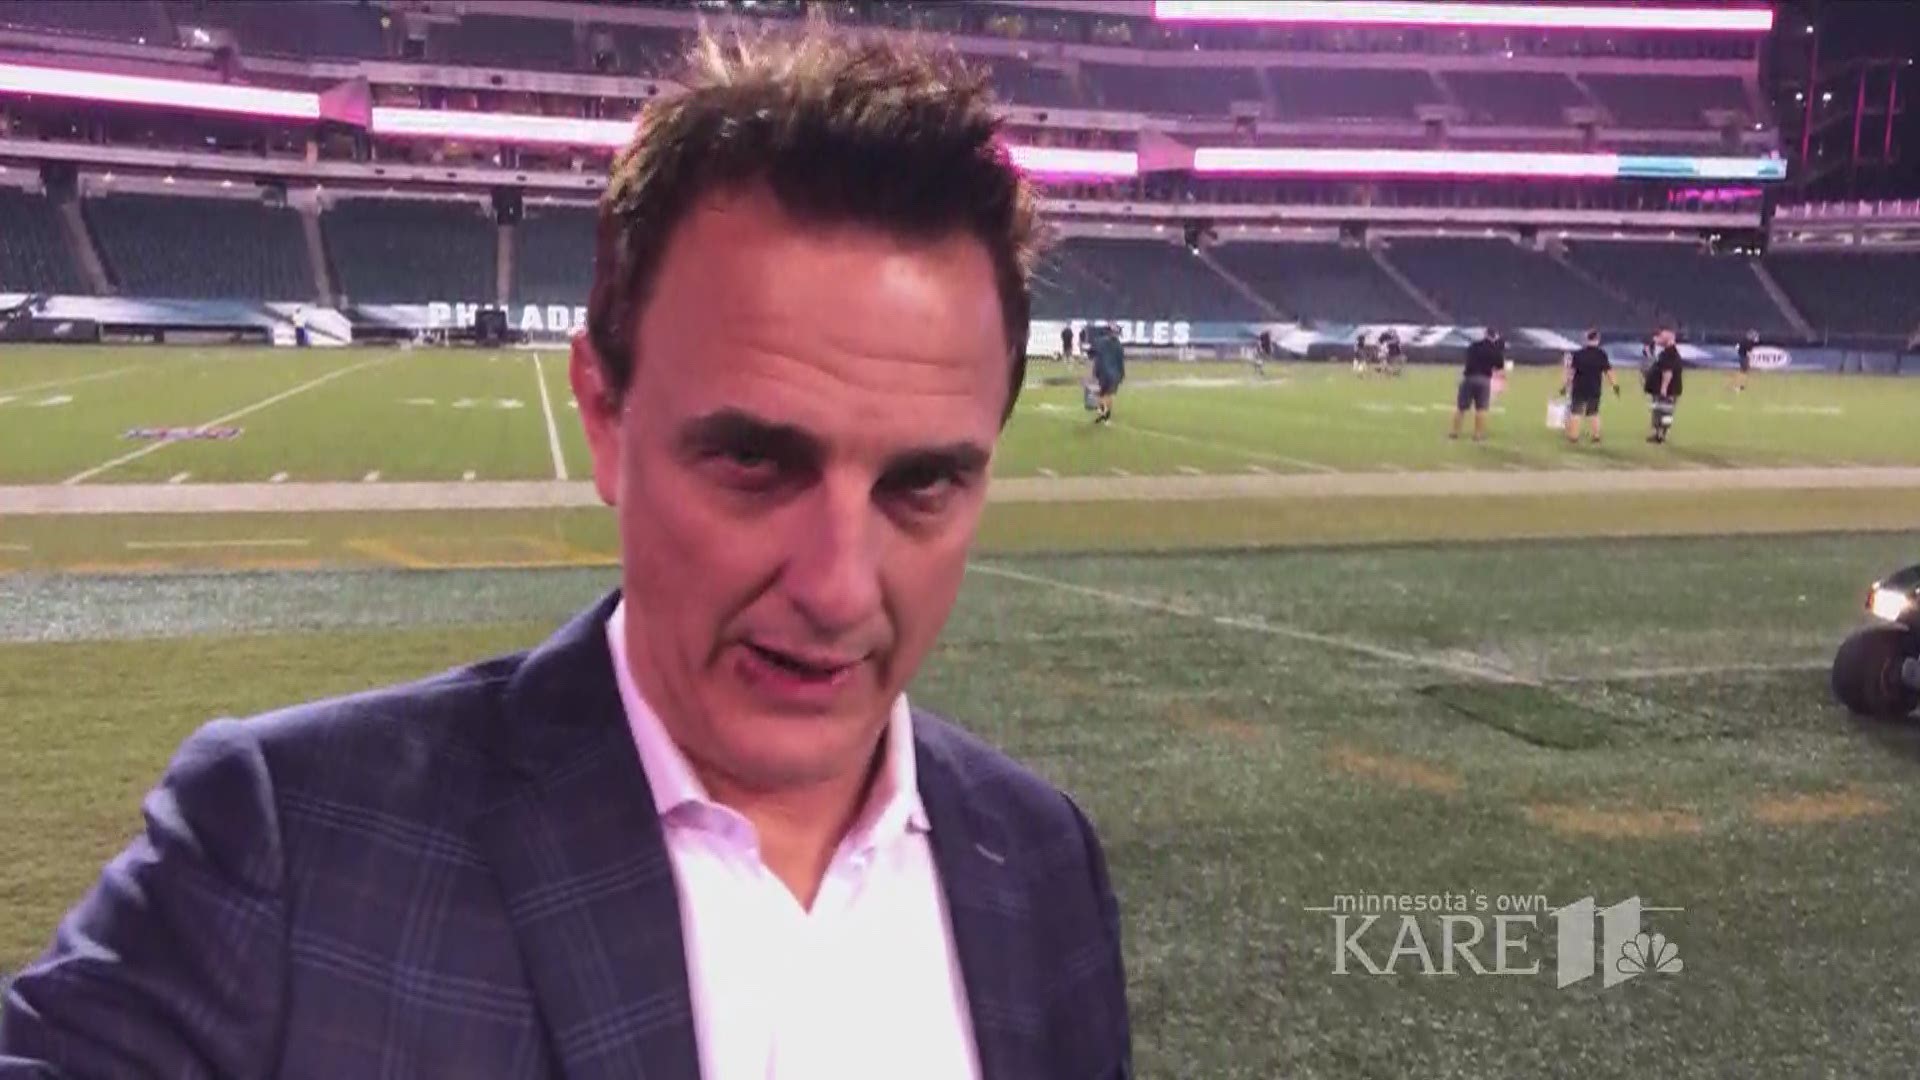 The Minnesota Vikings beat the Philadelphia Eagles 23-21 on Sunday. KARE 11's Eric Perkins offers a recap from the field. https://kare11.tv/2y9q2Zx